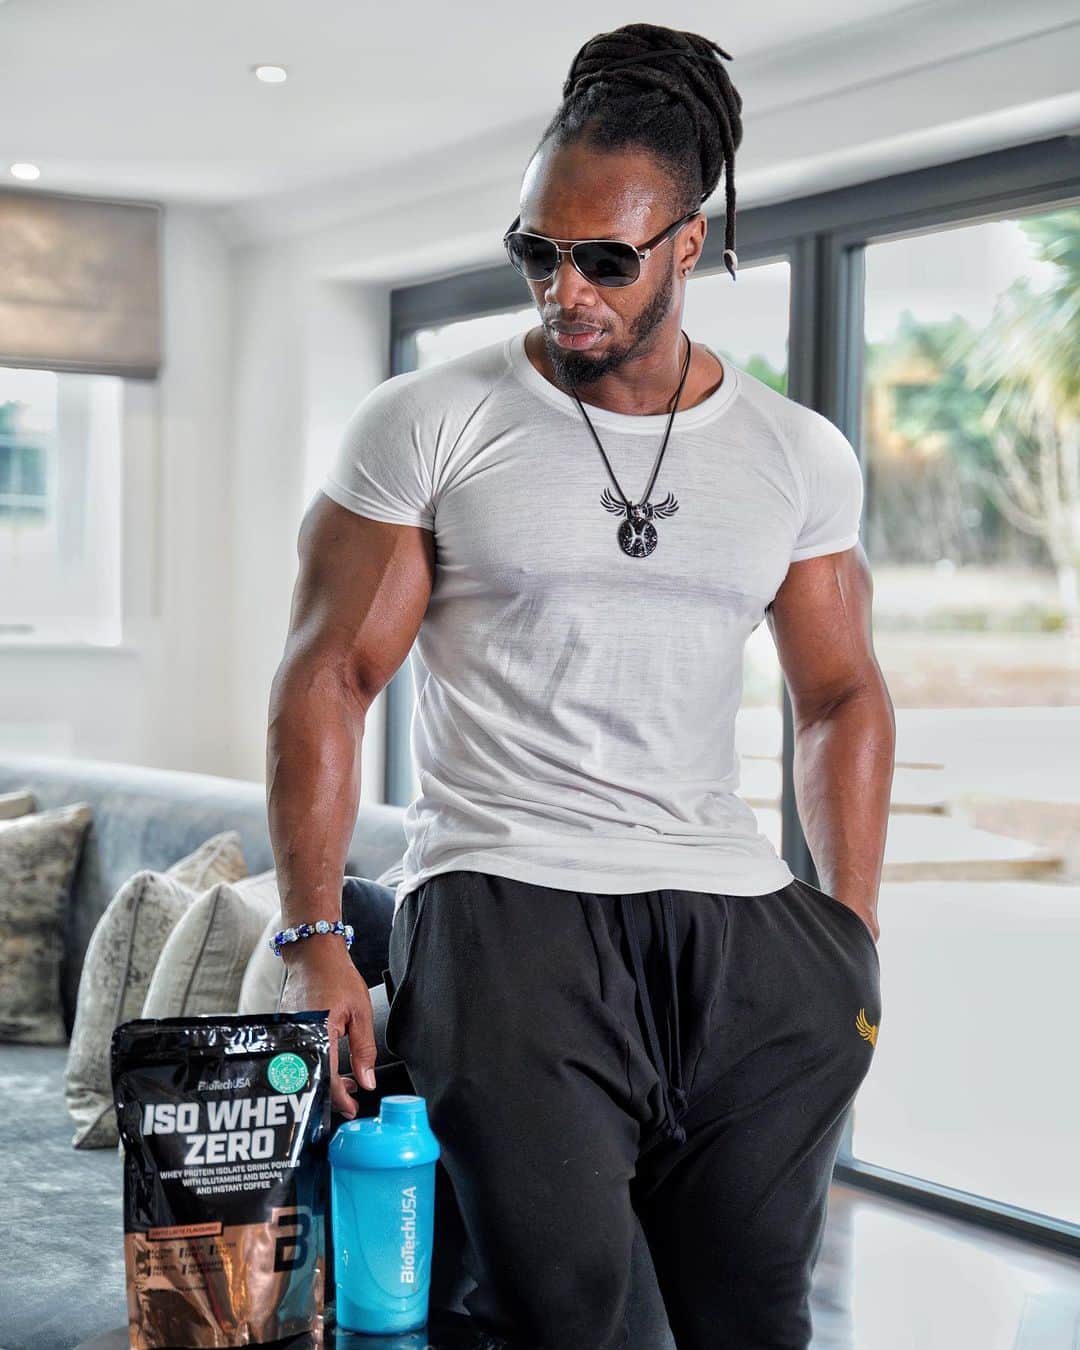 Ulissesworldのインスタグラム：「Better yourself everyday 💪🏽  it’s always good to refuel ⛽️ @biotechusa   Recharging with BiotechUSA ISO Whey Zero after a big workout 🏋🏽‍♀️ Always push for progression.   #ulissesworld #biotechusa #protein #gym #workout #thefeelingofsuccess」